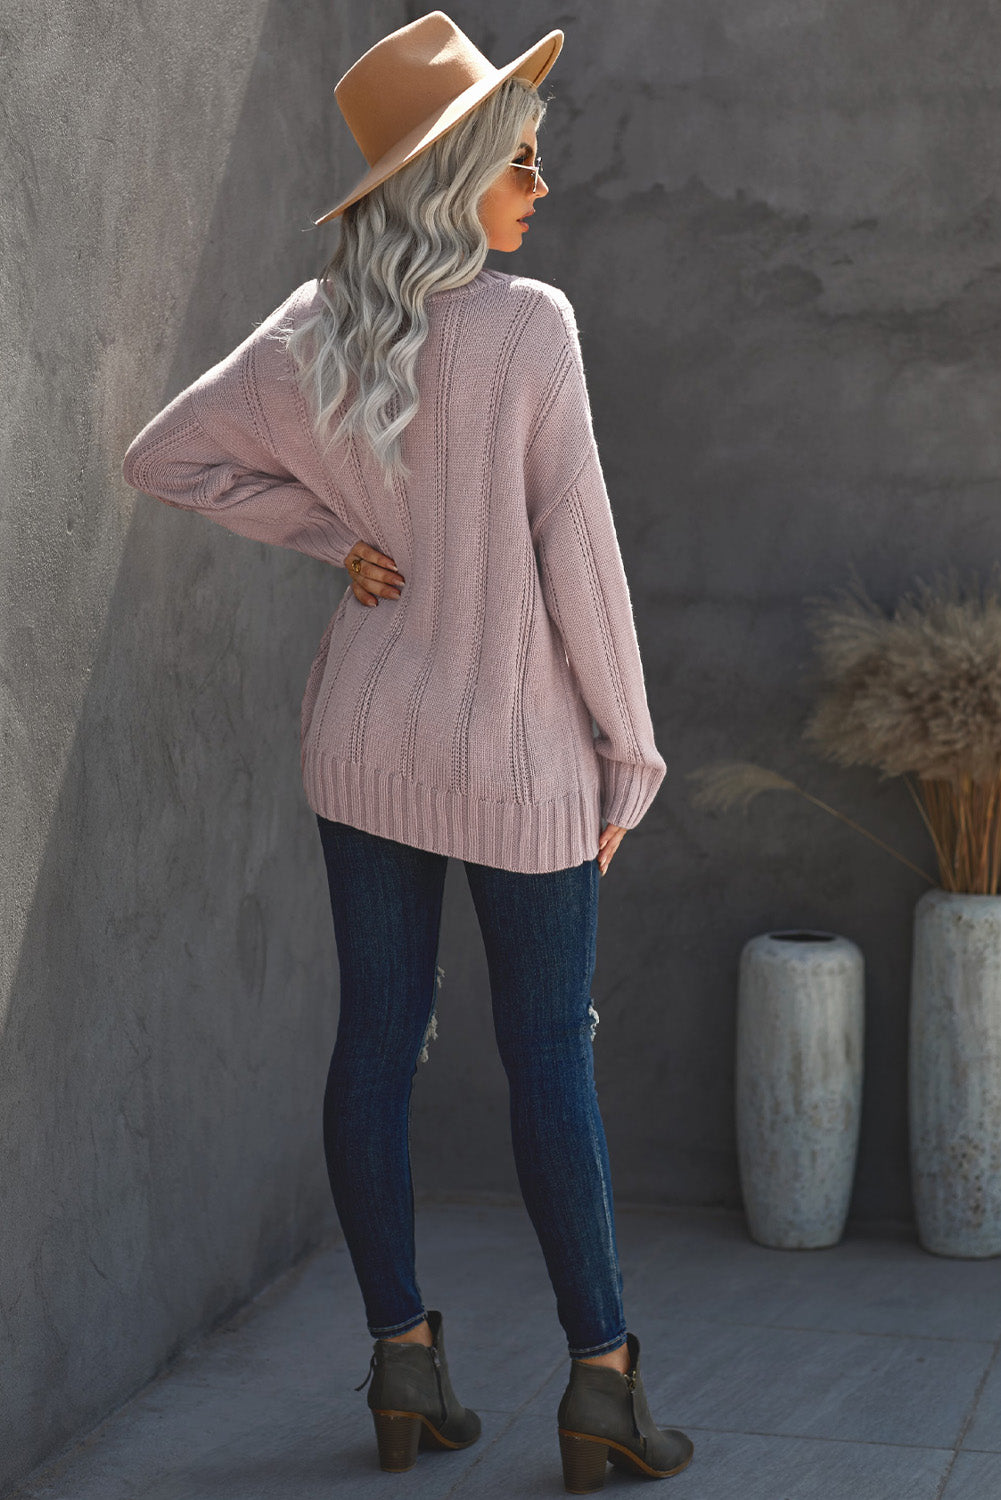 Wine Oversize Thick Pullover Sweater